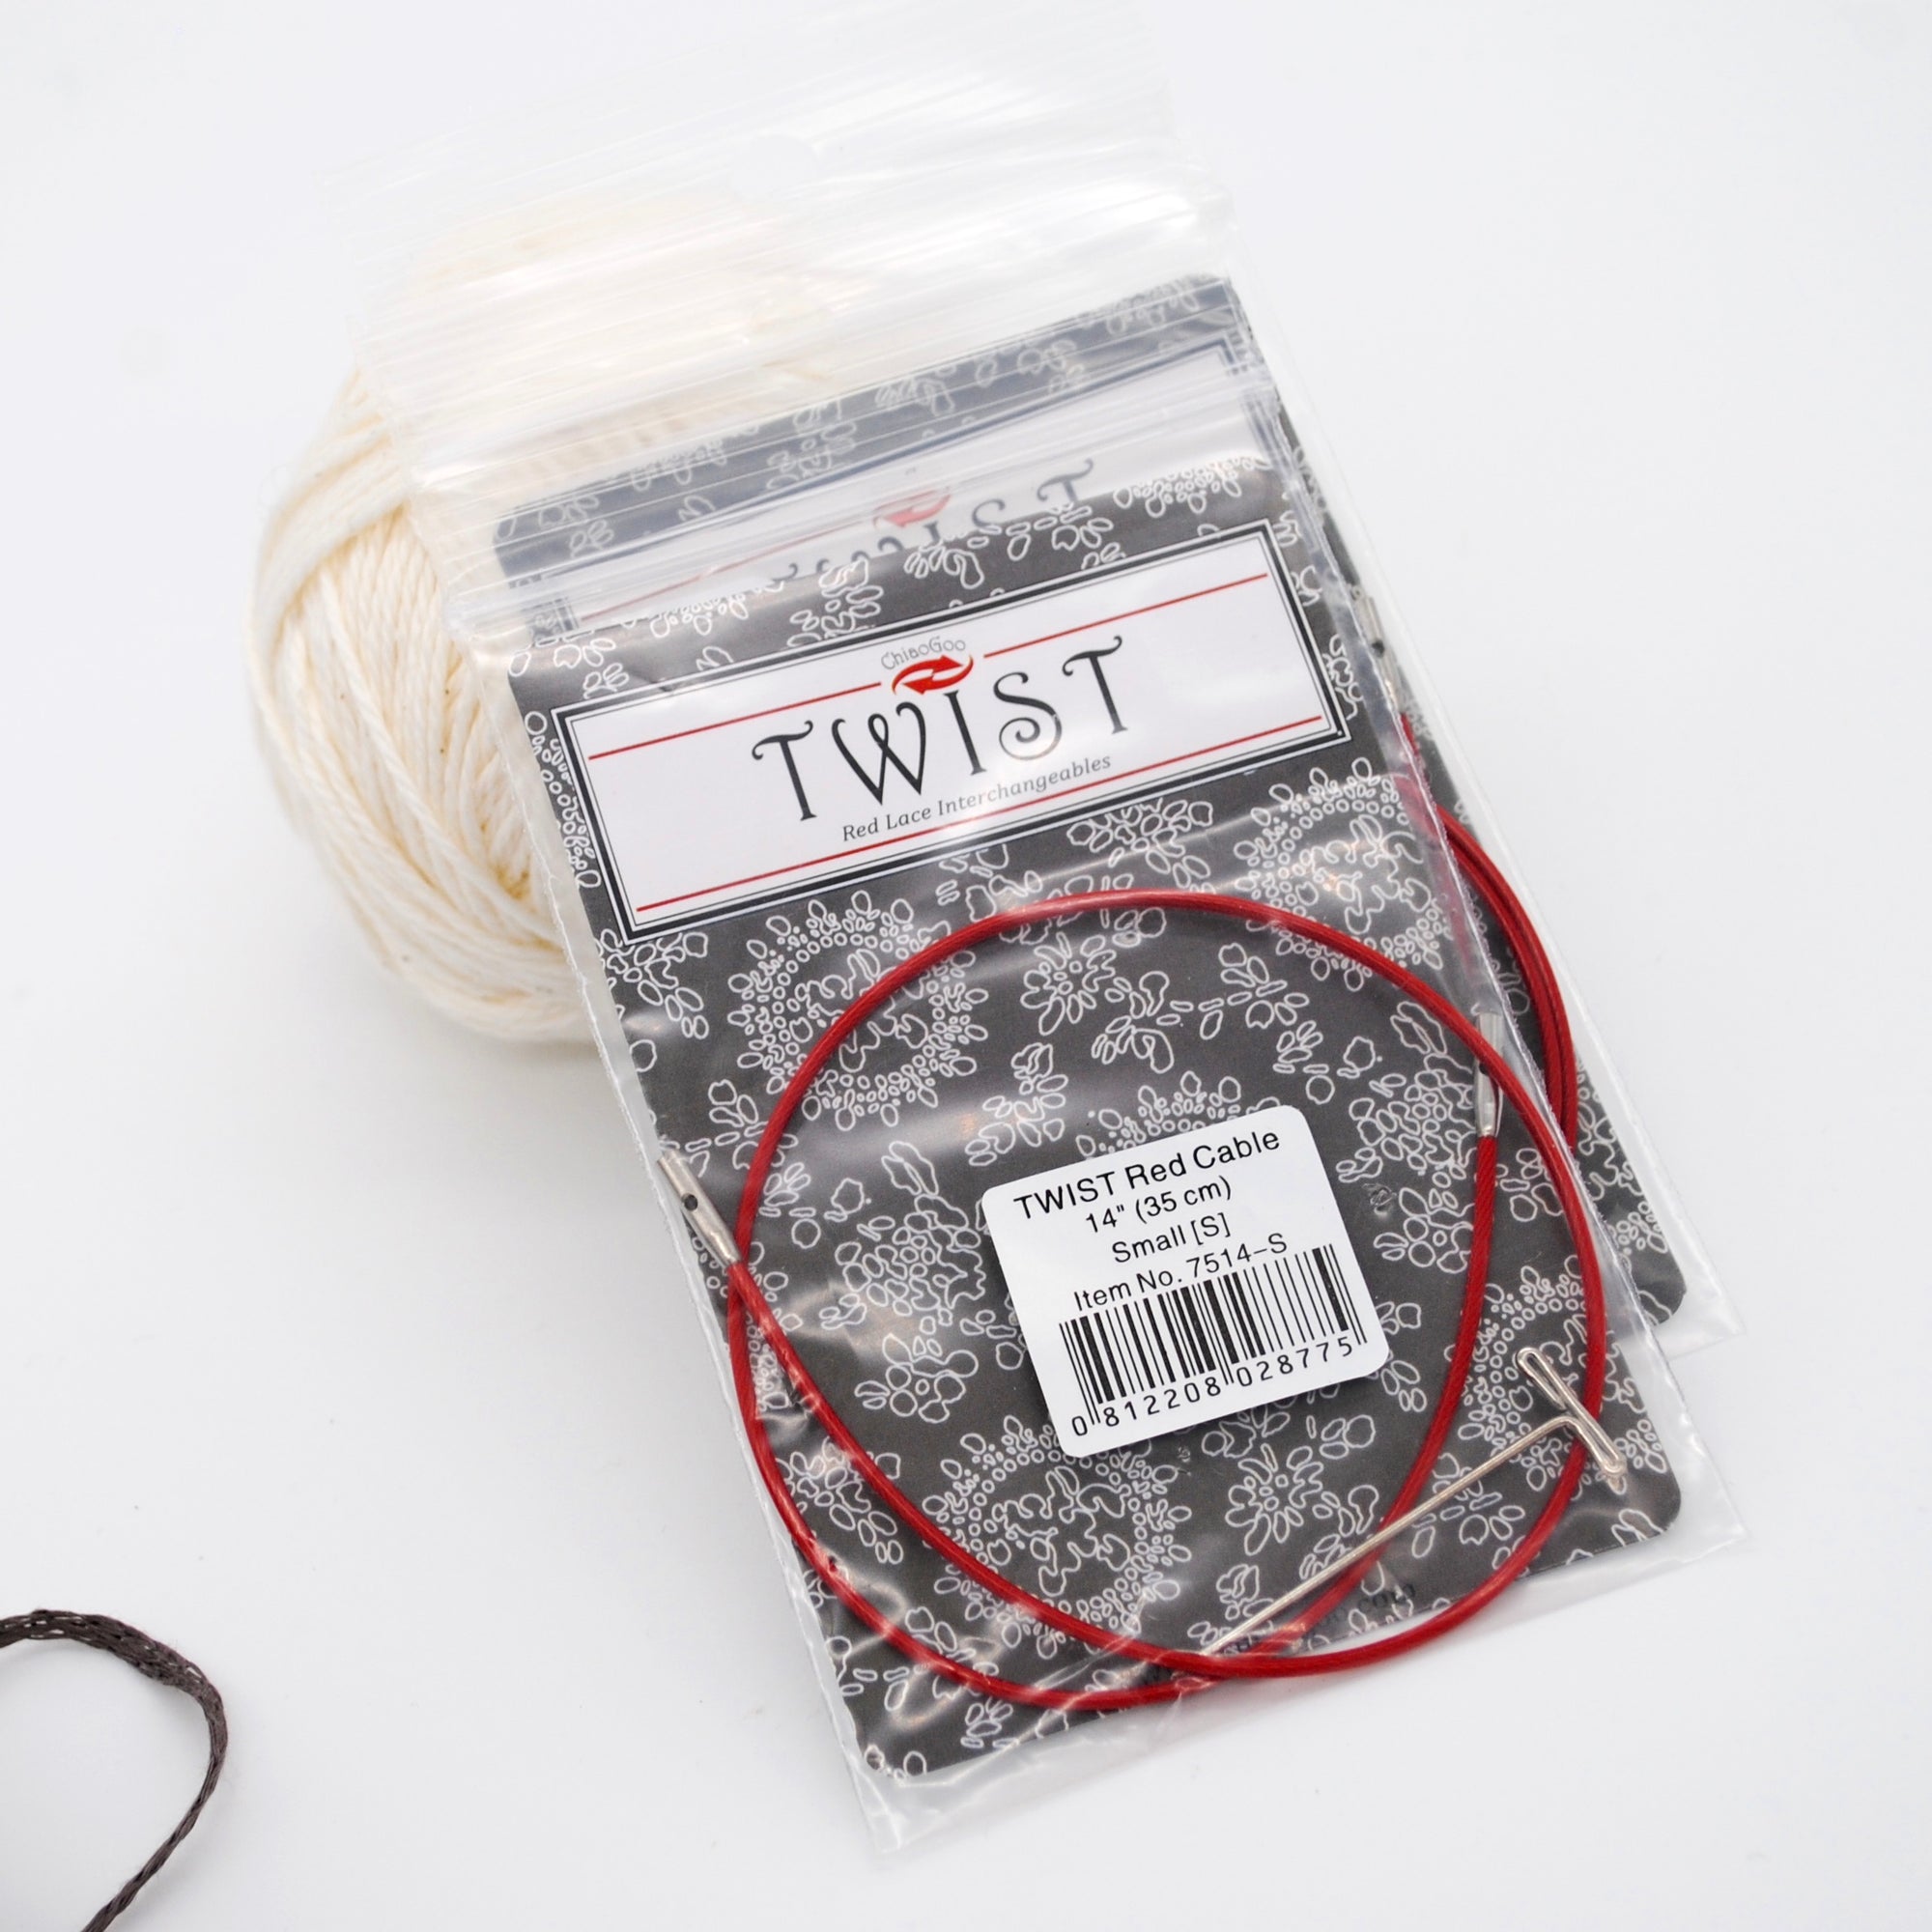 Chiaogoo Twist Red Cable - Apricot Yarn & Supply